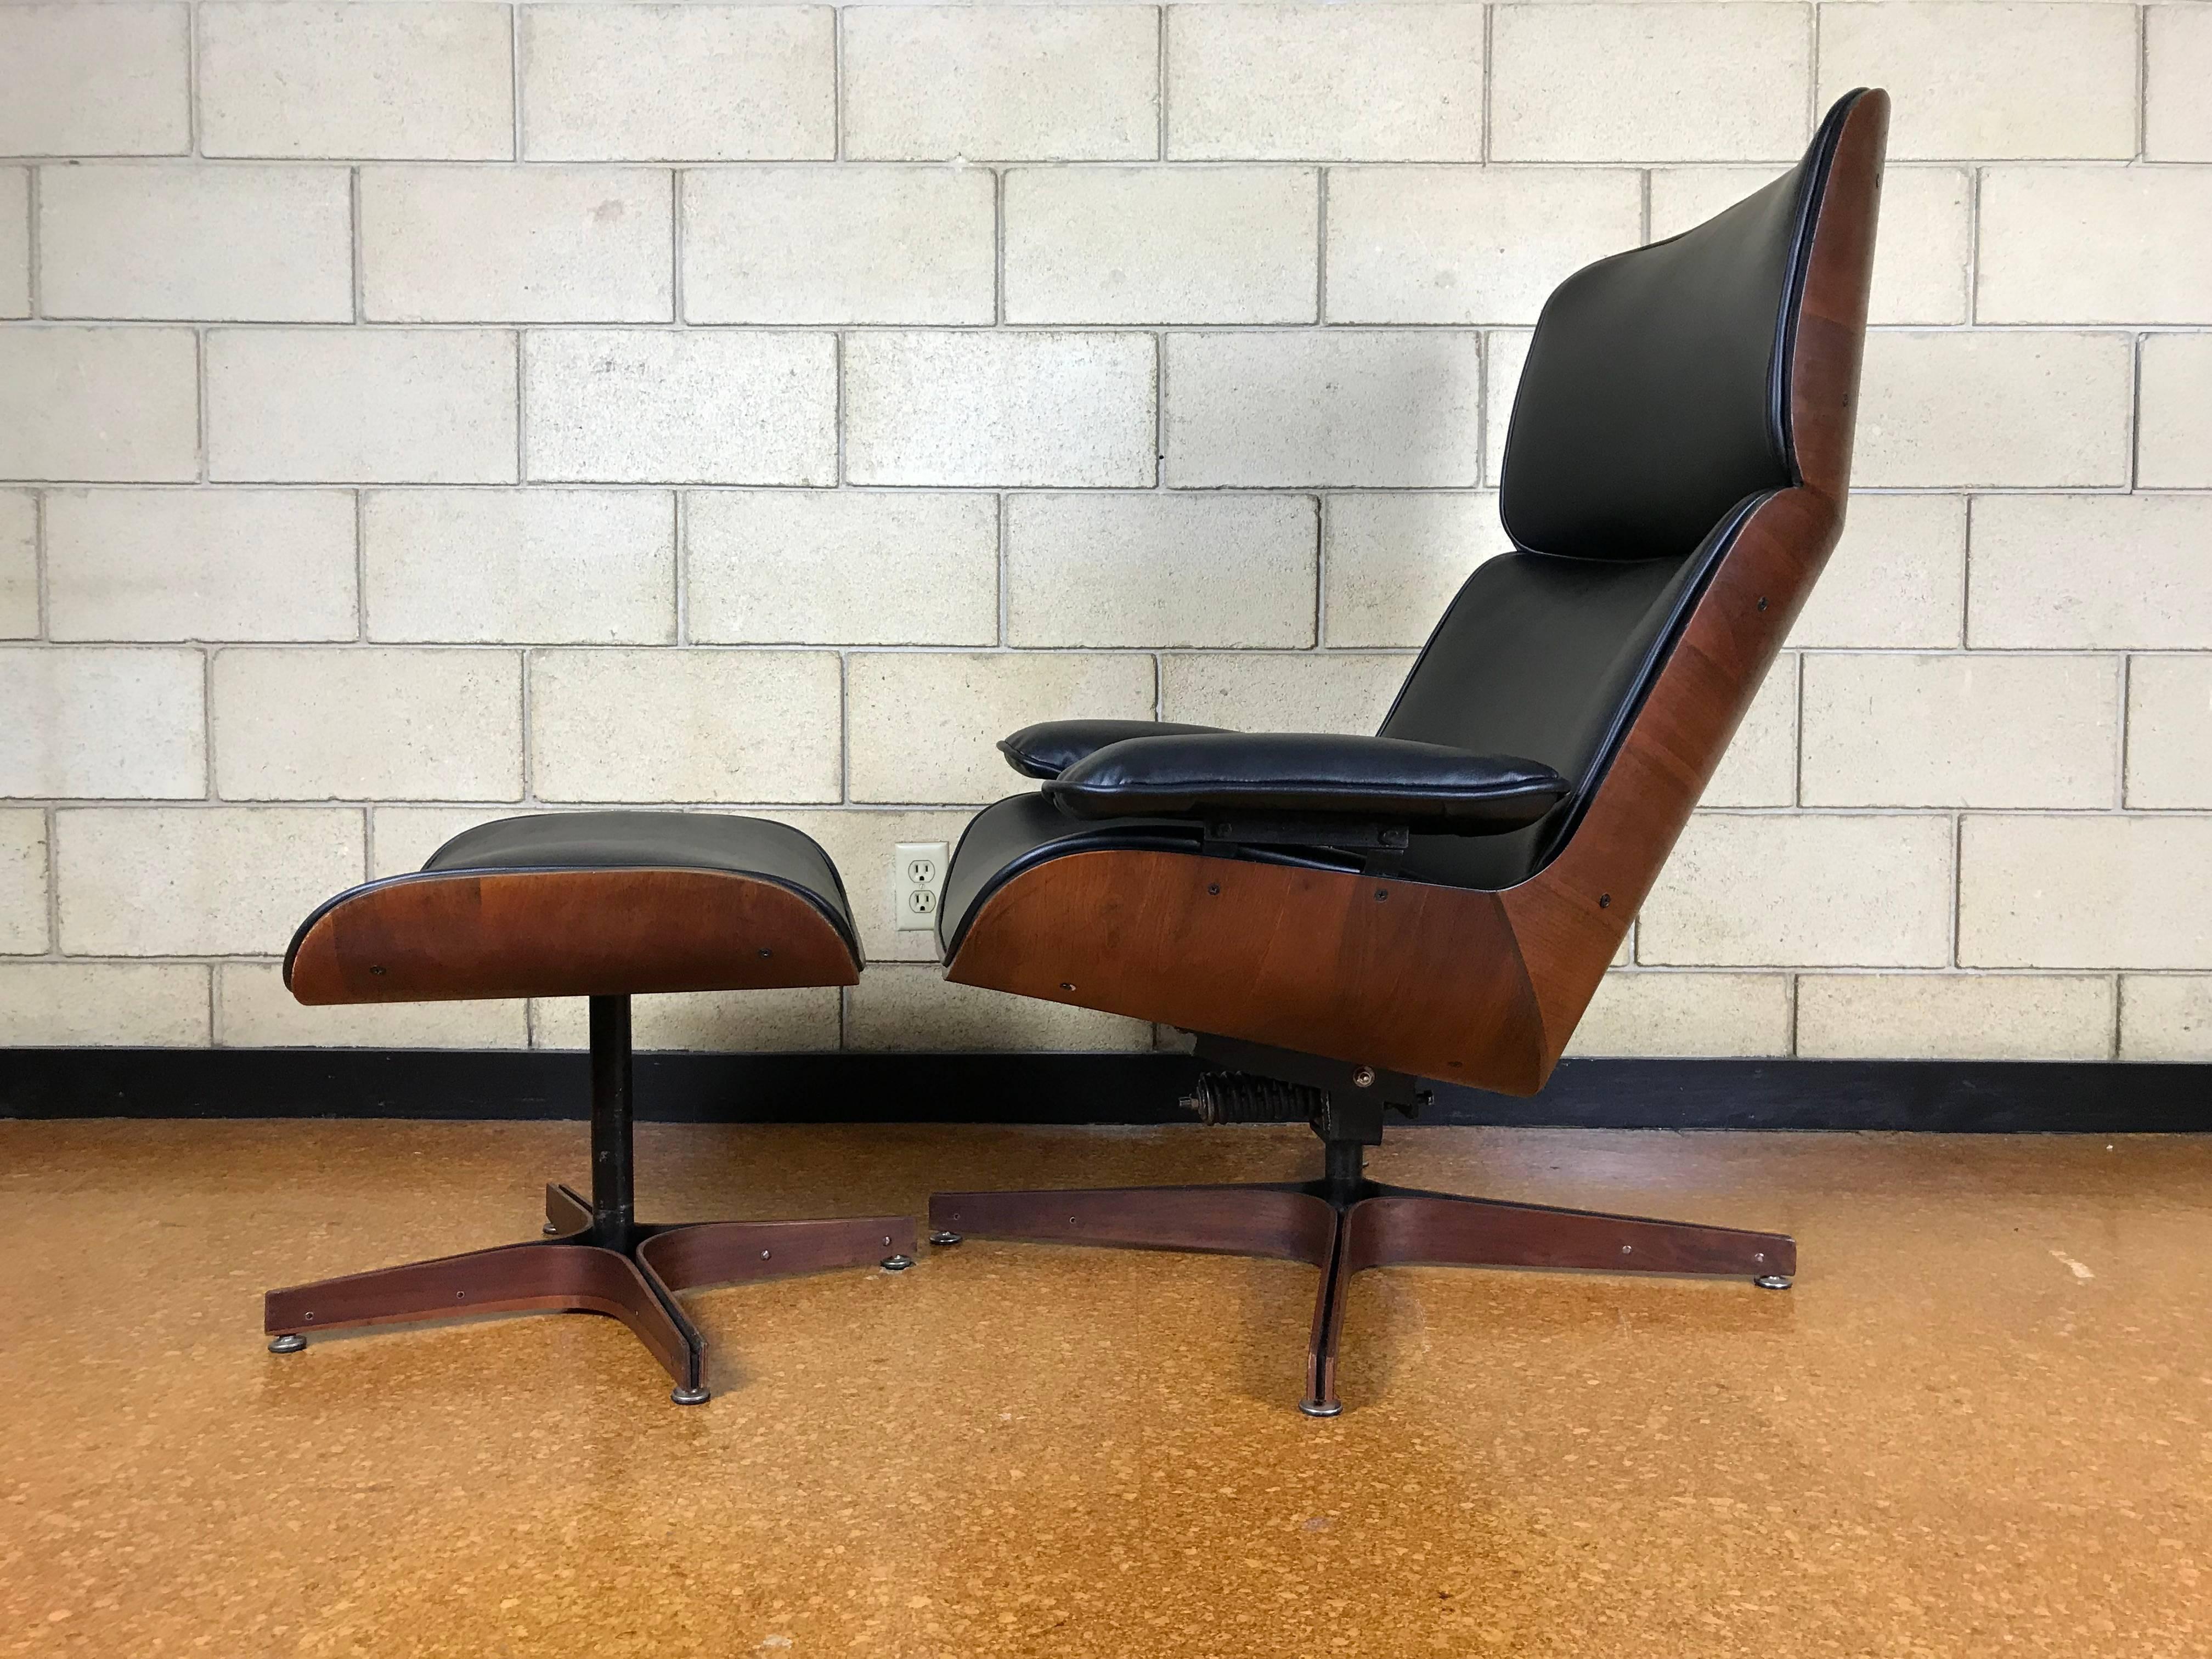 Made of walnut, new cushions and black Naugahyde fabric - this example of Mulhauser's work is sleek and very comfortable. The chair can be adjusted to lean very far back. The walnut back is original. Please see pictures of minor blemishes/marks; it